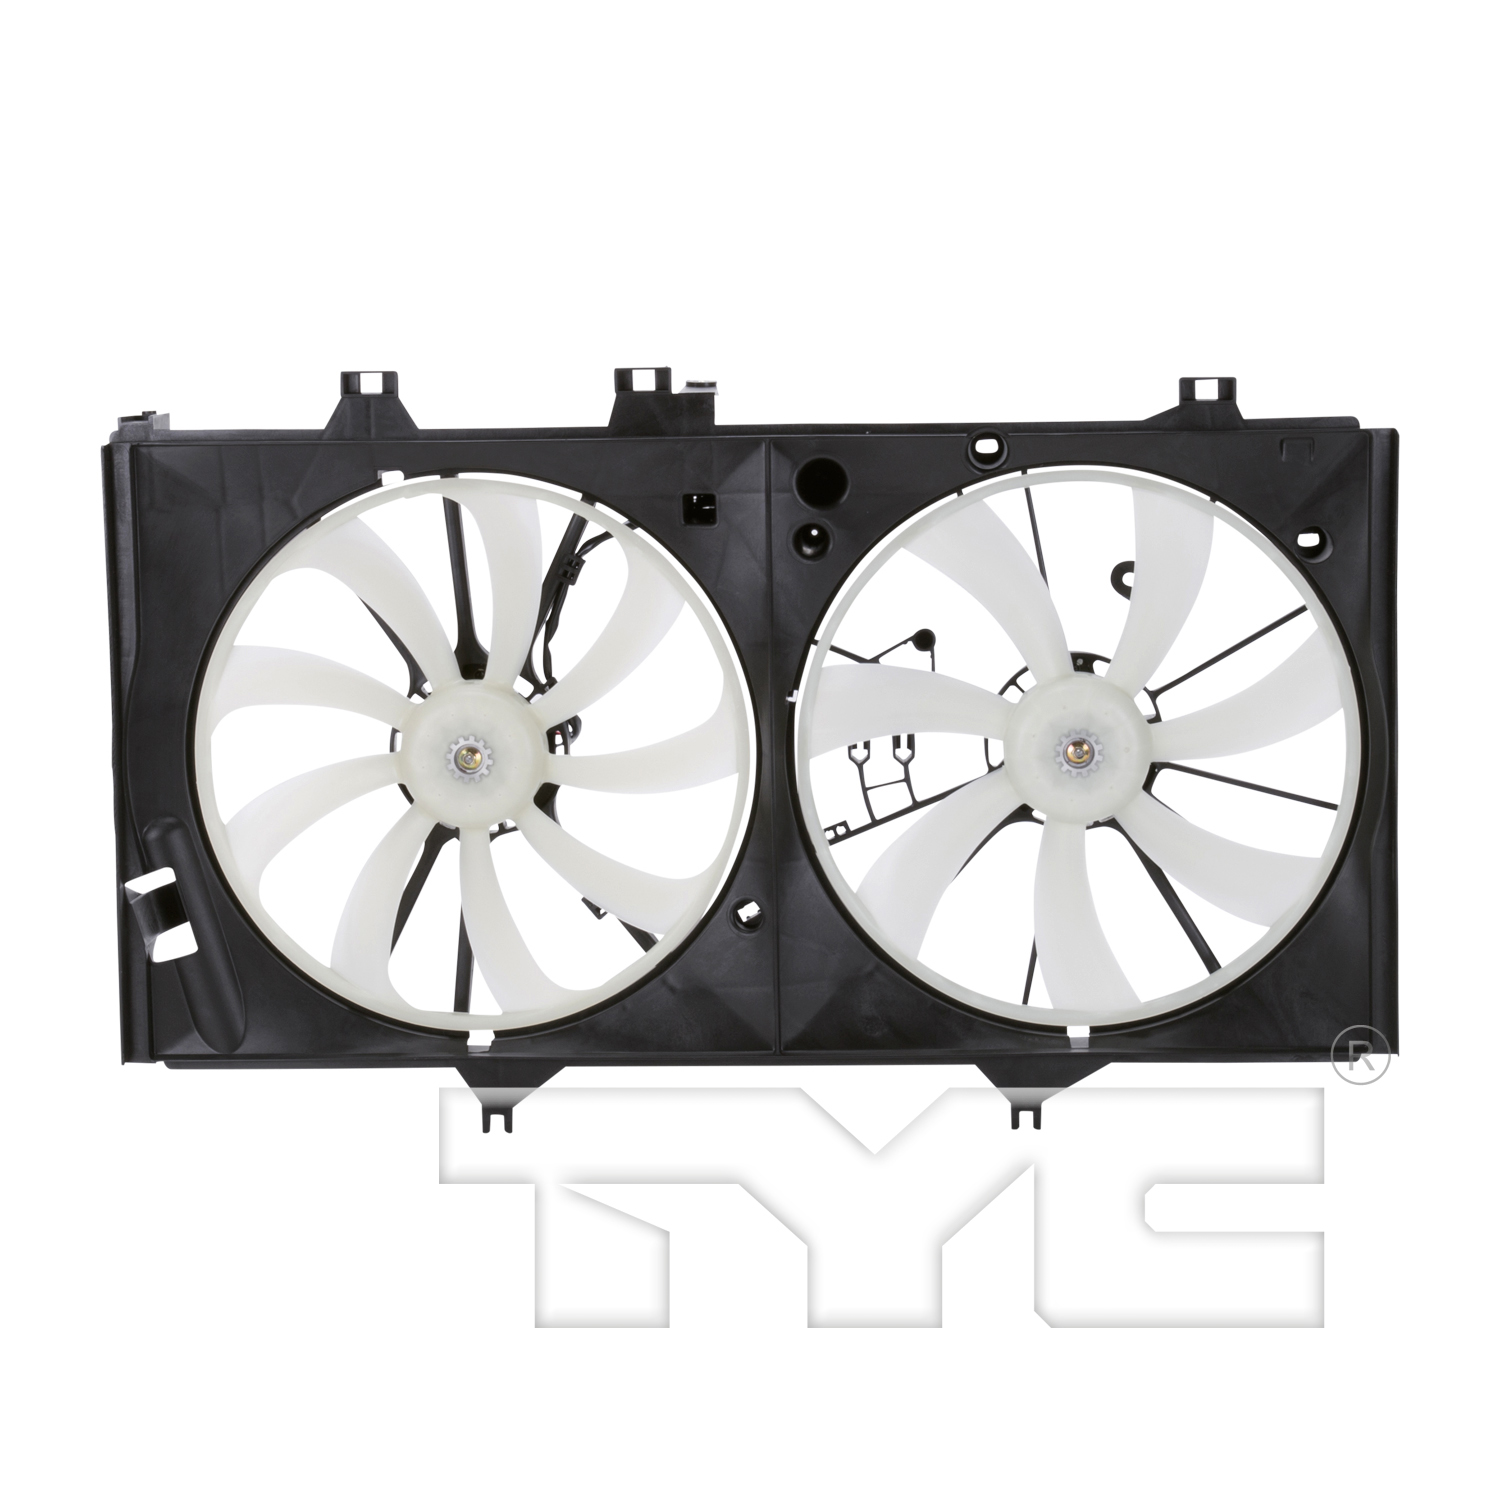 Aftermarket FAN ASSEMBLY/FAN SHROUDS for TOYOTA - CAMRY, CAMRY,12-17,Radiator cooling fan assy